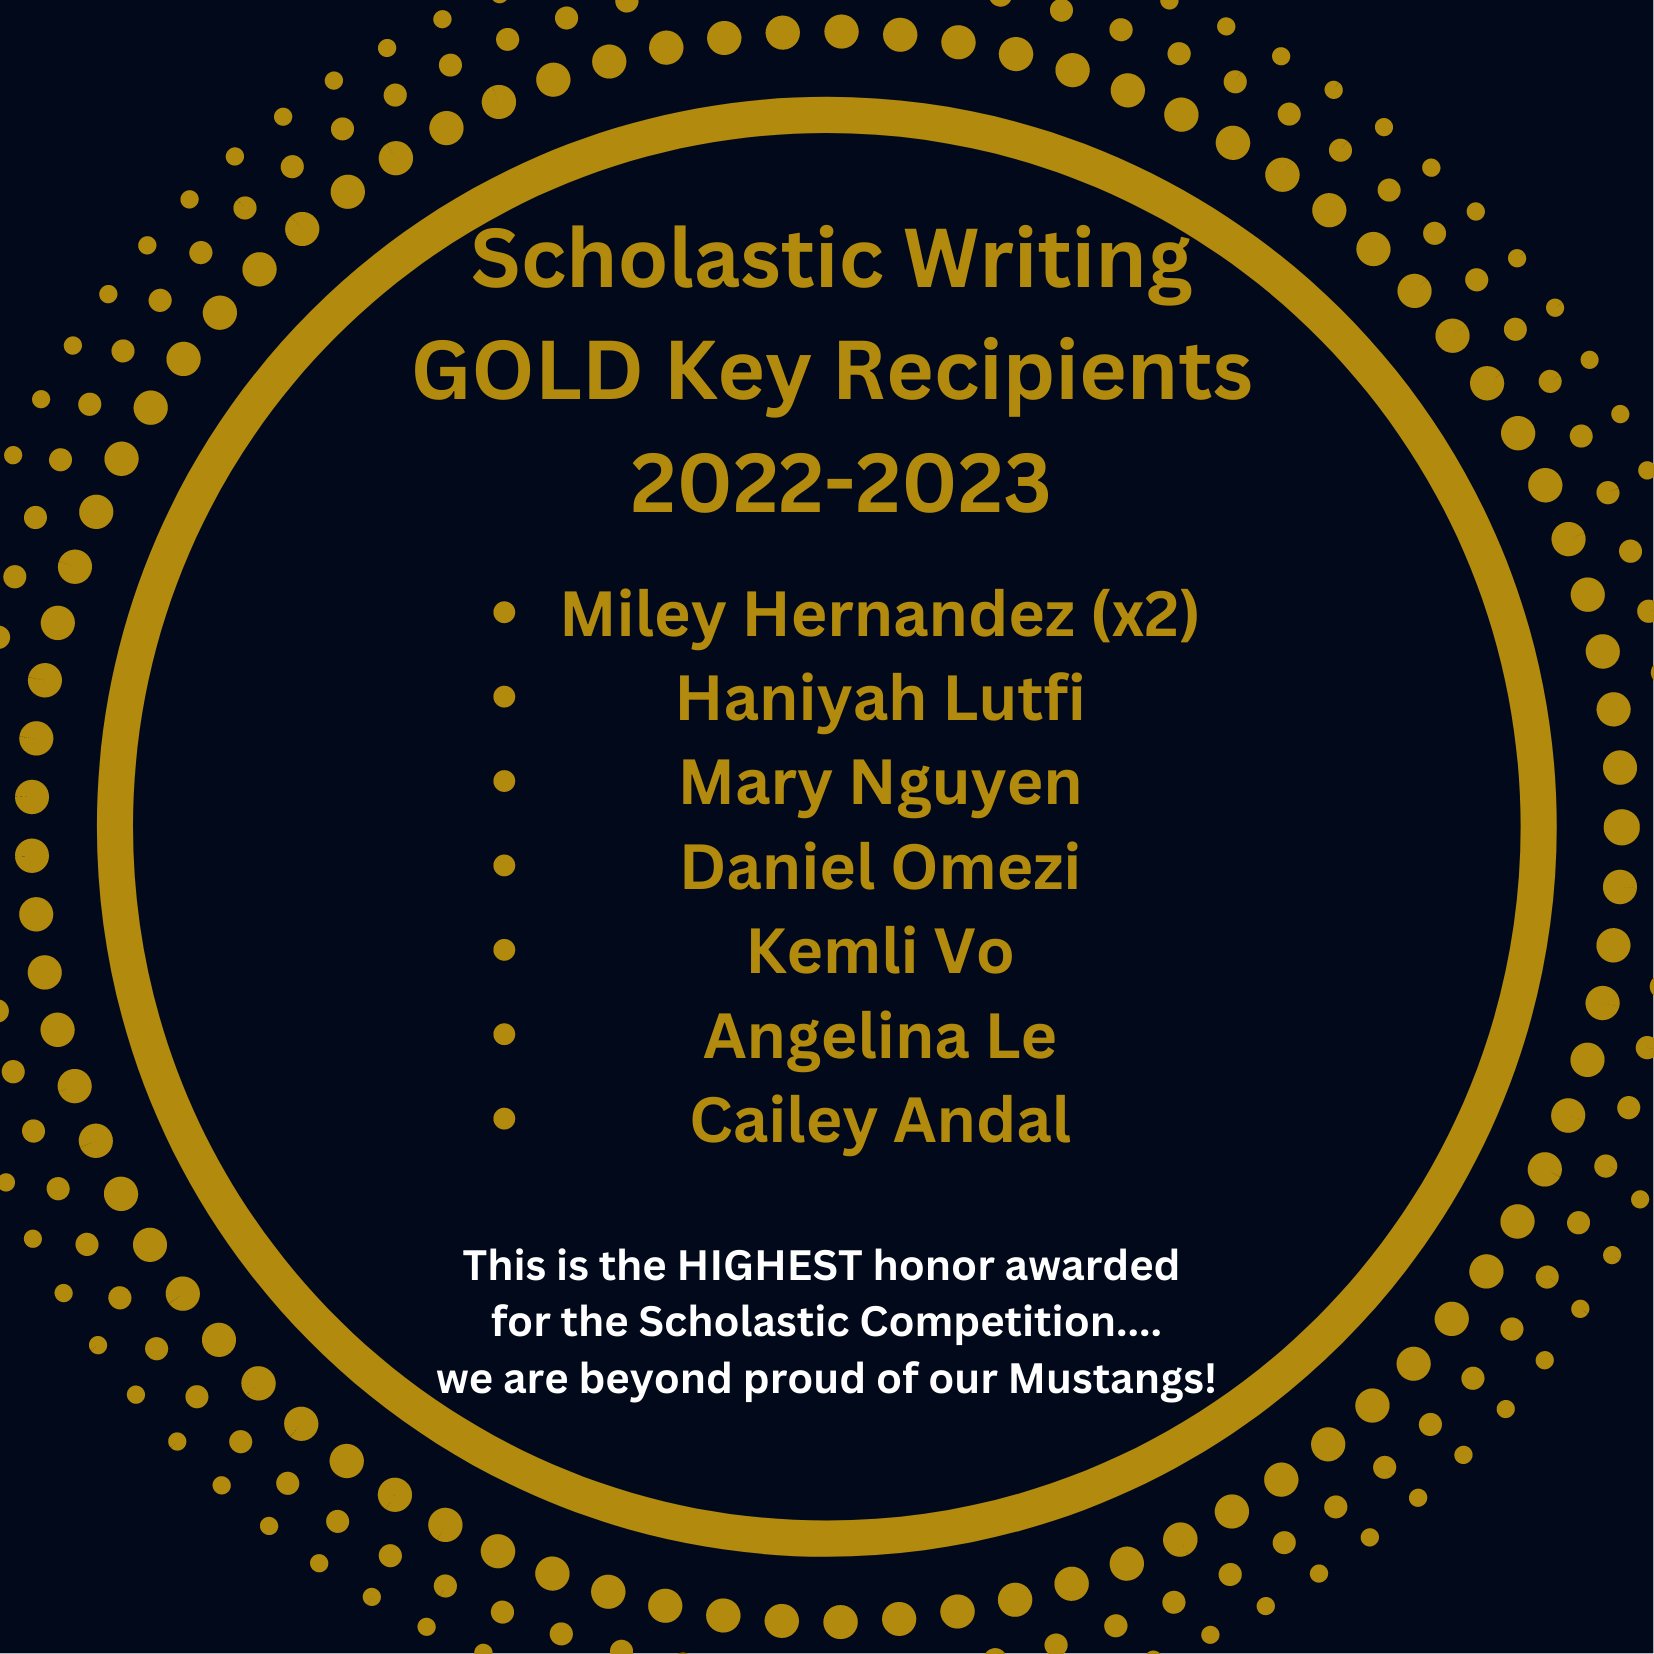 O'Donnell Middle on Twitter "And now for our GOLD Key Scholastic